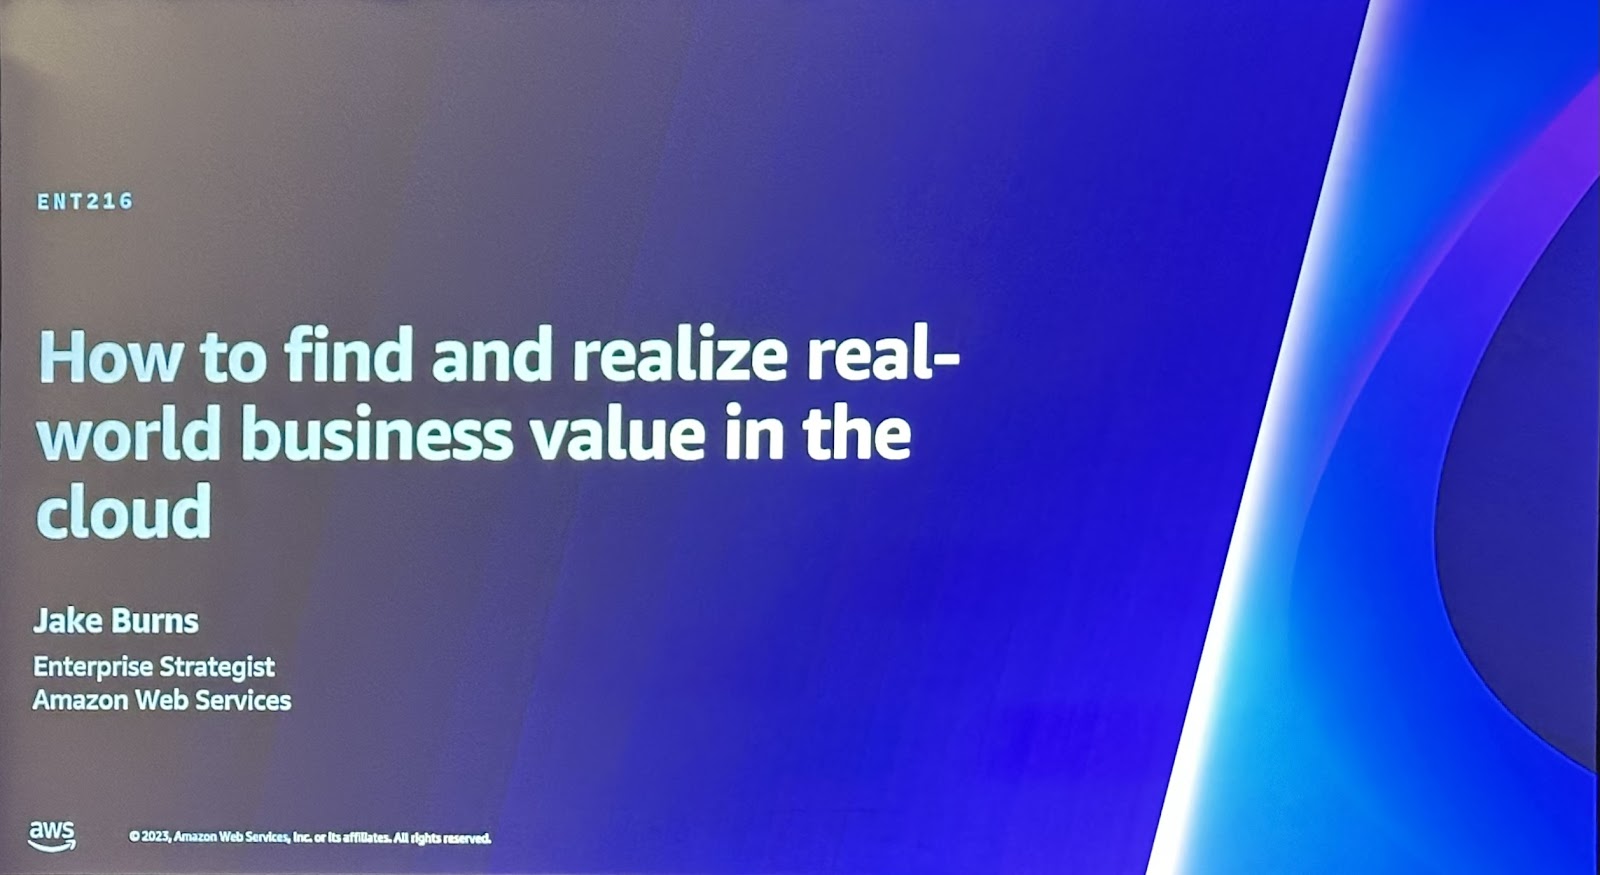 How to find and realize real-world business value in the cloud